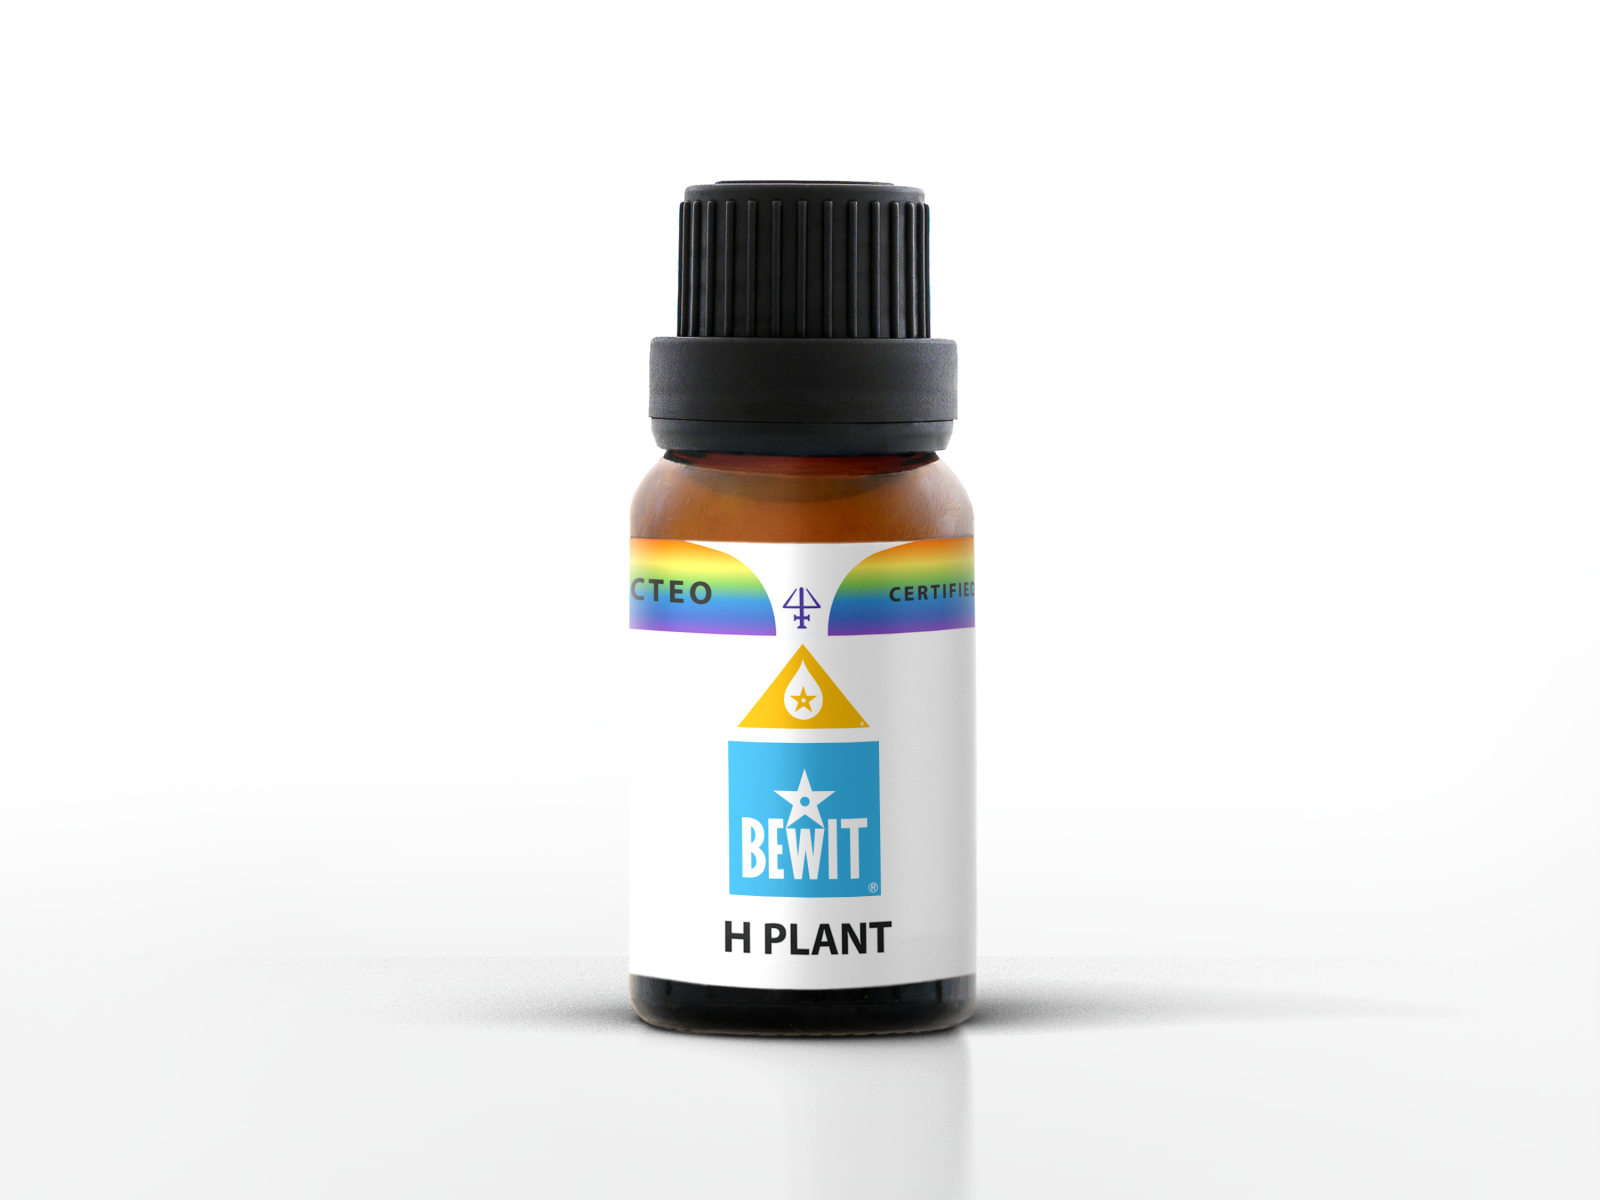 BEWIT H PLANT - Blend of essential oils